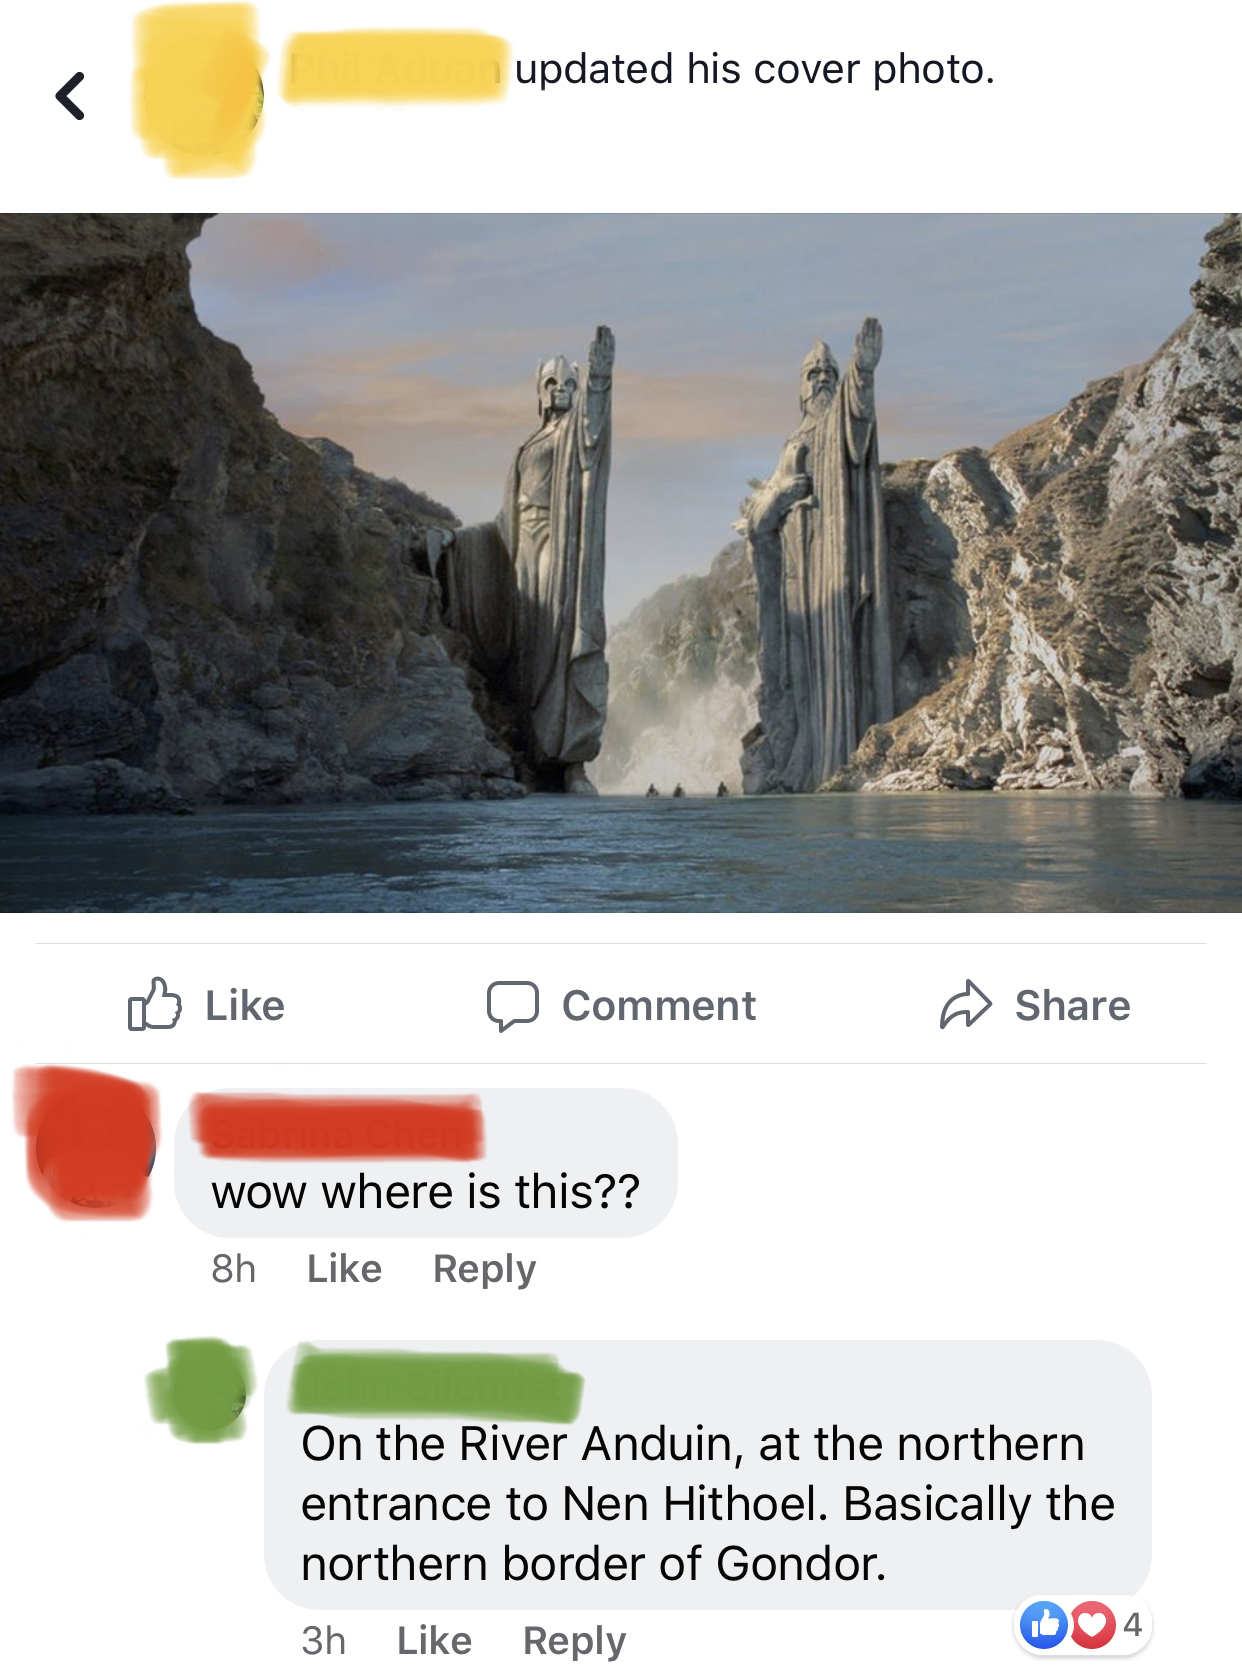 lord of the rings argonath - updated his cover photo. comment Wow where is this?? 8h On the River Anduin, at the northern entrance to Nen Hithoel. Basically the northern border of Gondor. 3h 004